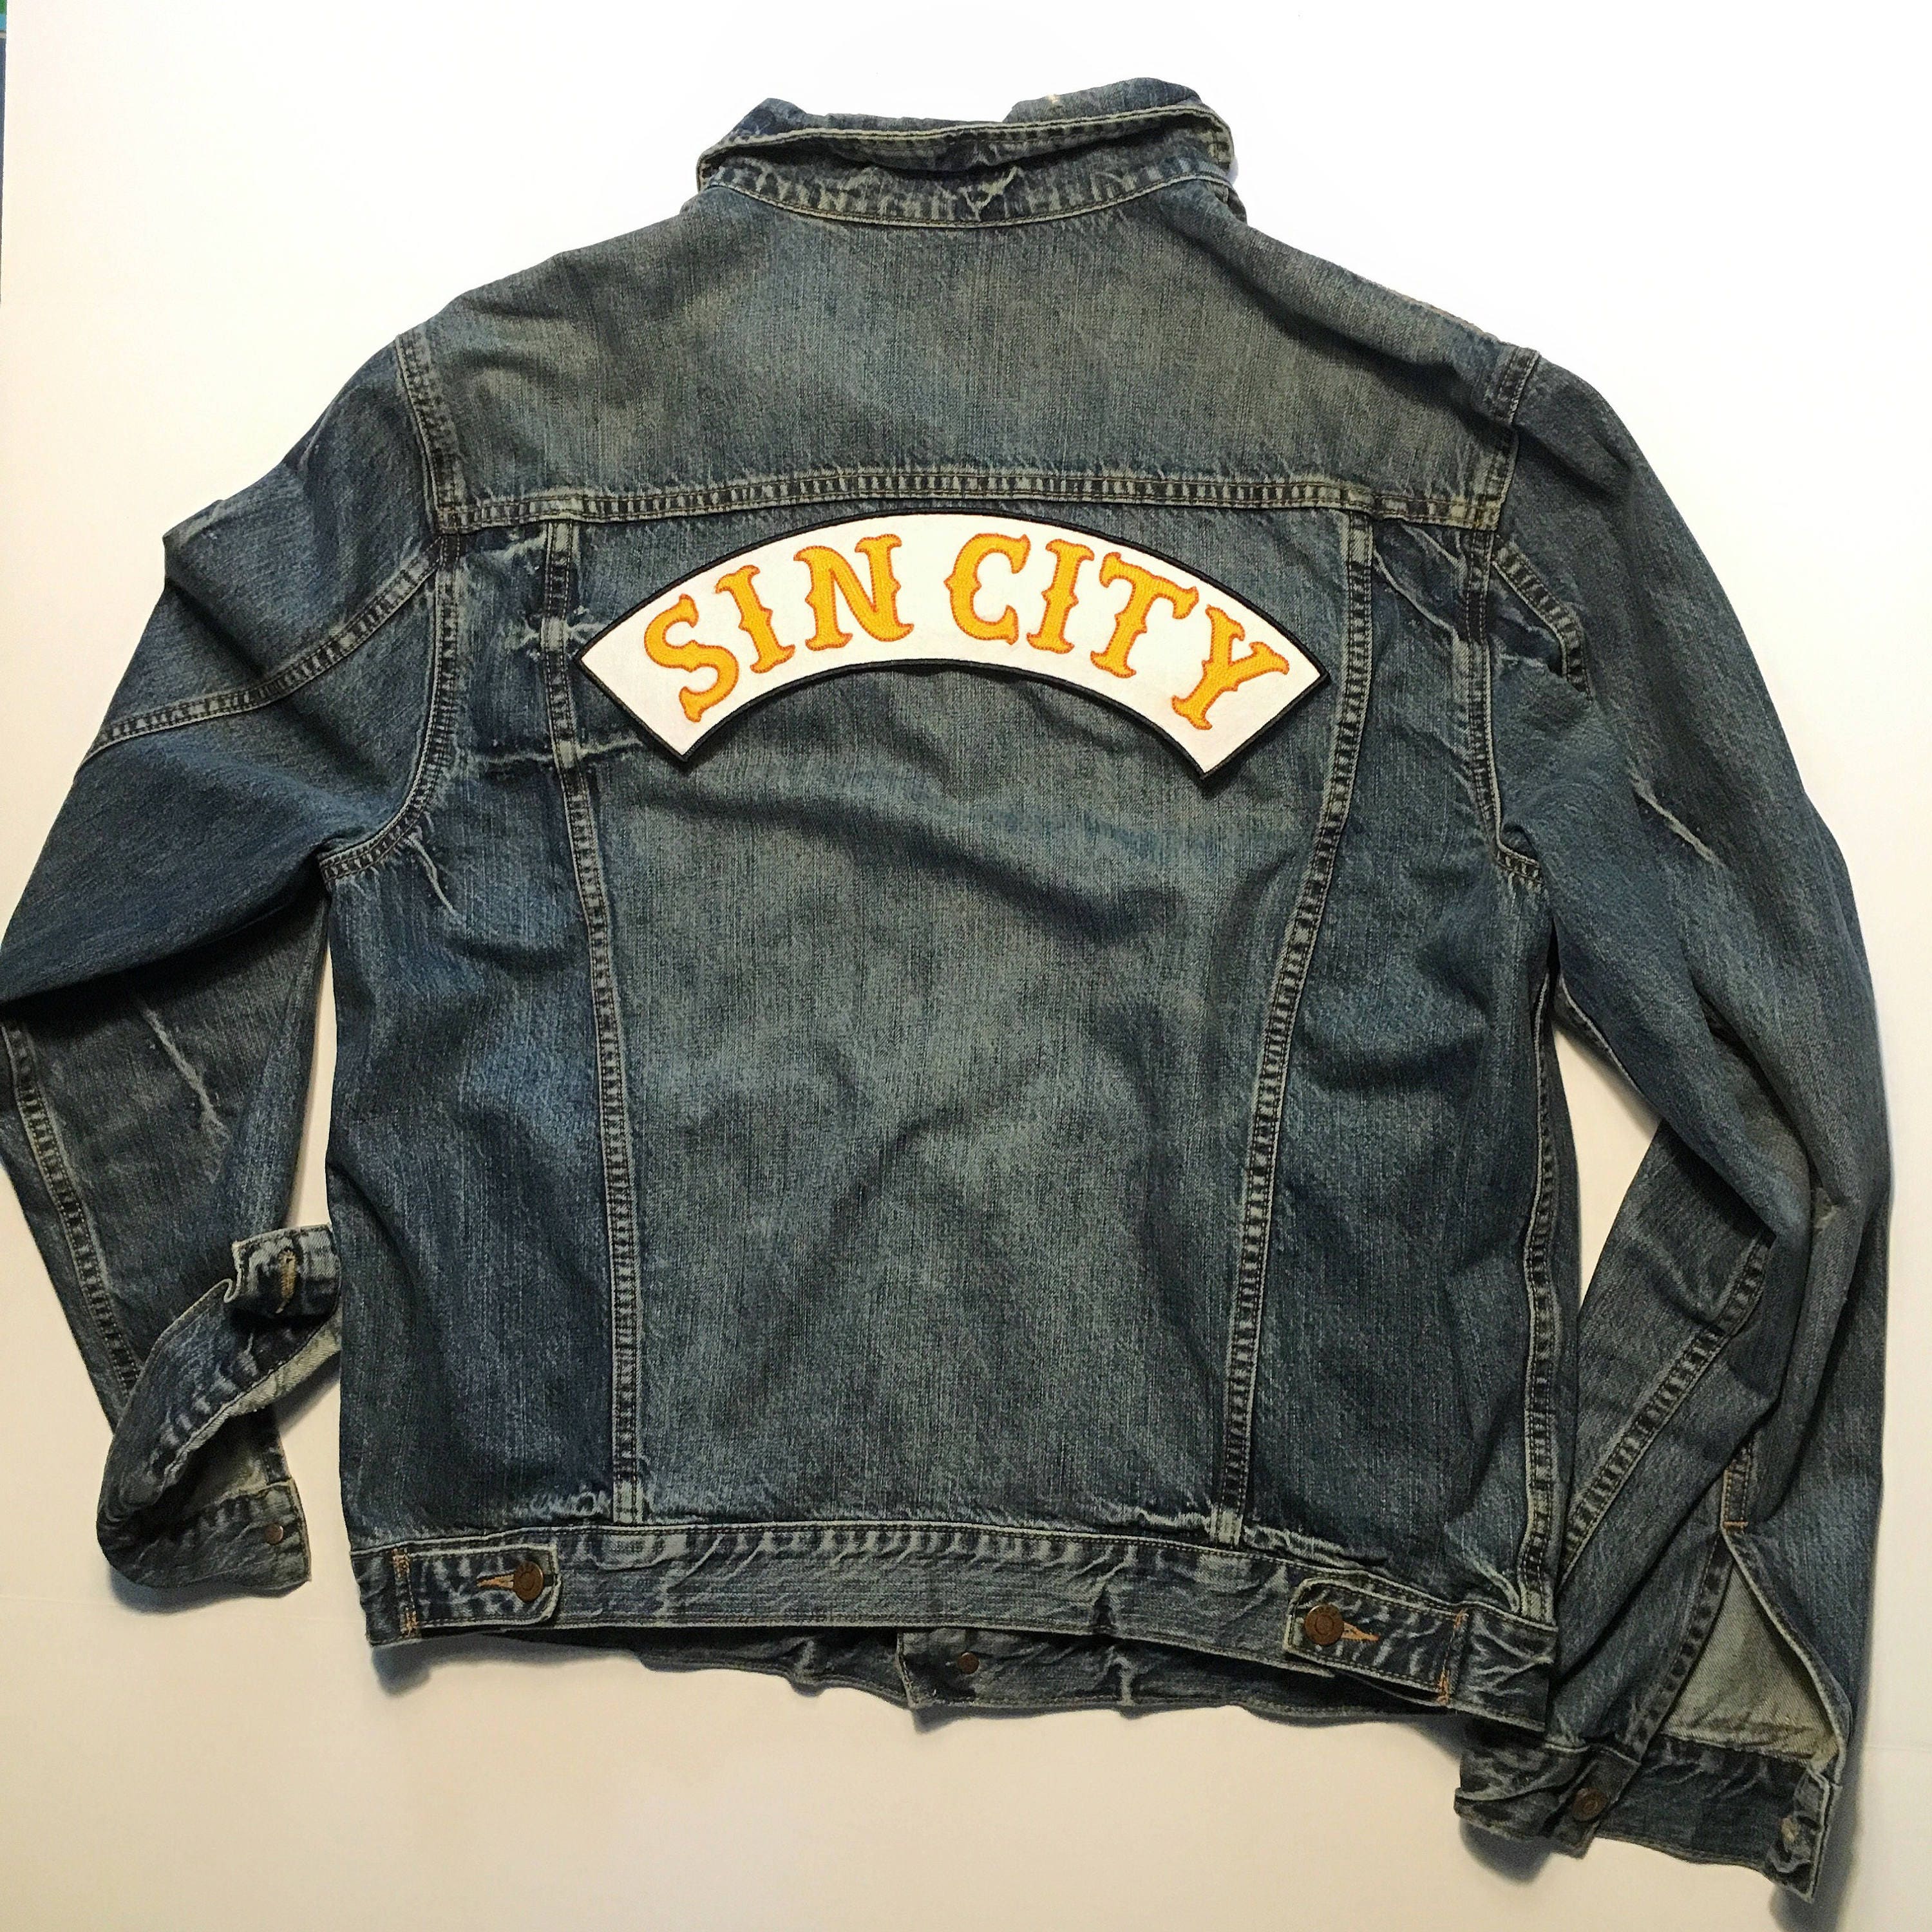 Sin City Patch Hand Sewn on a distressed Jean Jacket